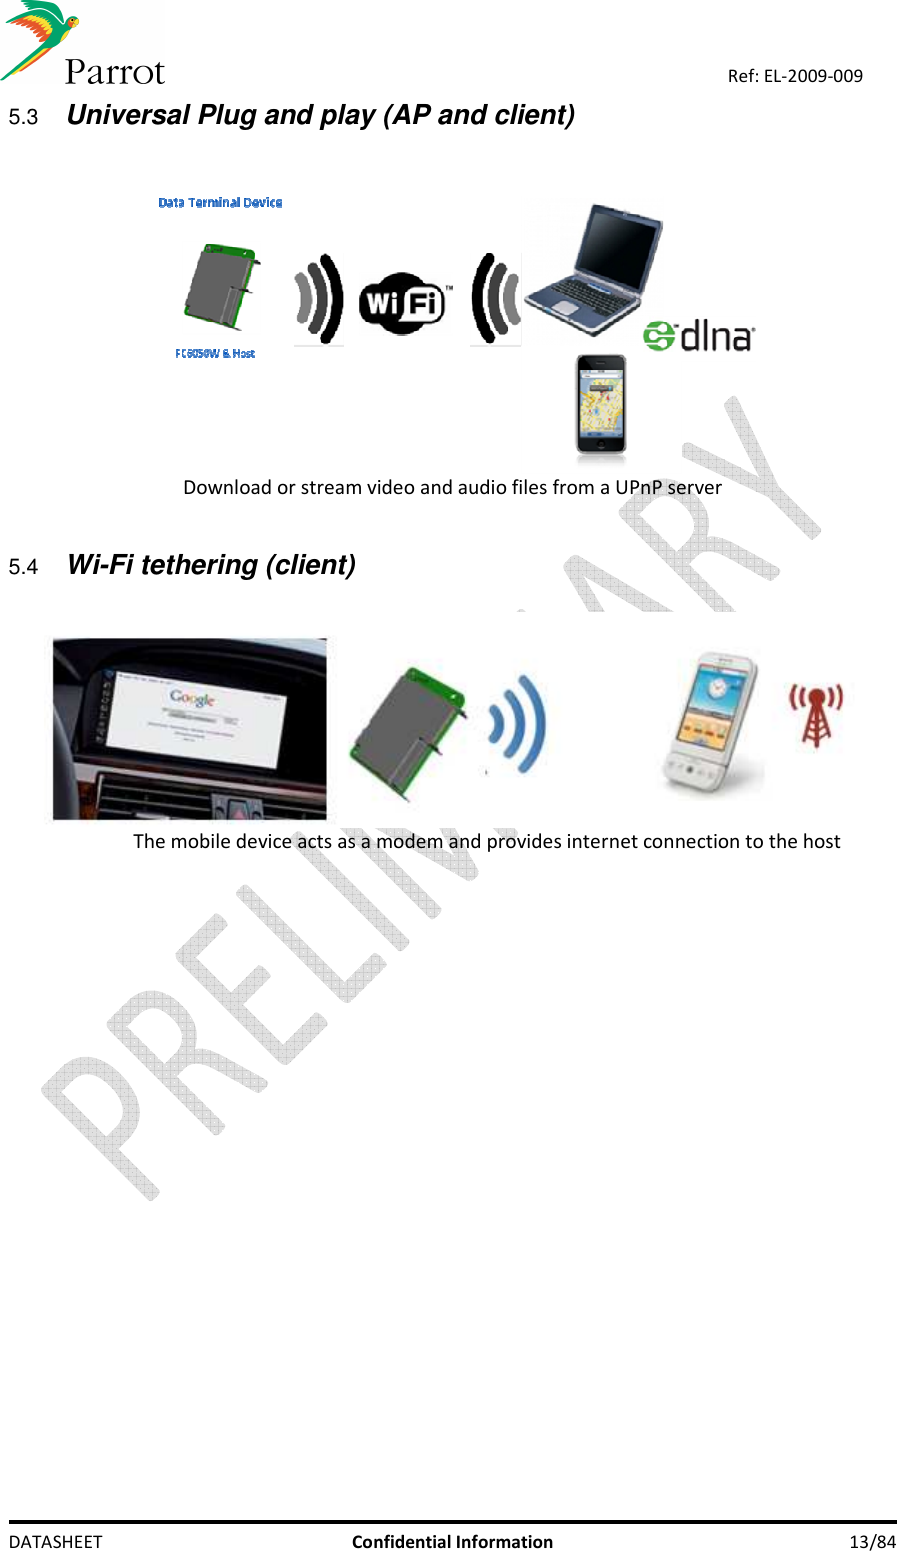    DATASHEET  Confidential Information  13/84 Ref: EL-2009-009 5.3 Universal Plug and play (AP and client)    Download or stream video and audio files from a UPnP server  5.4 Wi-Fi tethering (client)     The mobile device acts as a modem and provides internet connection to the host     